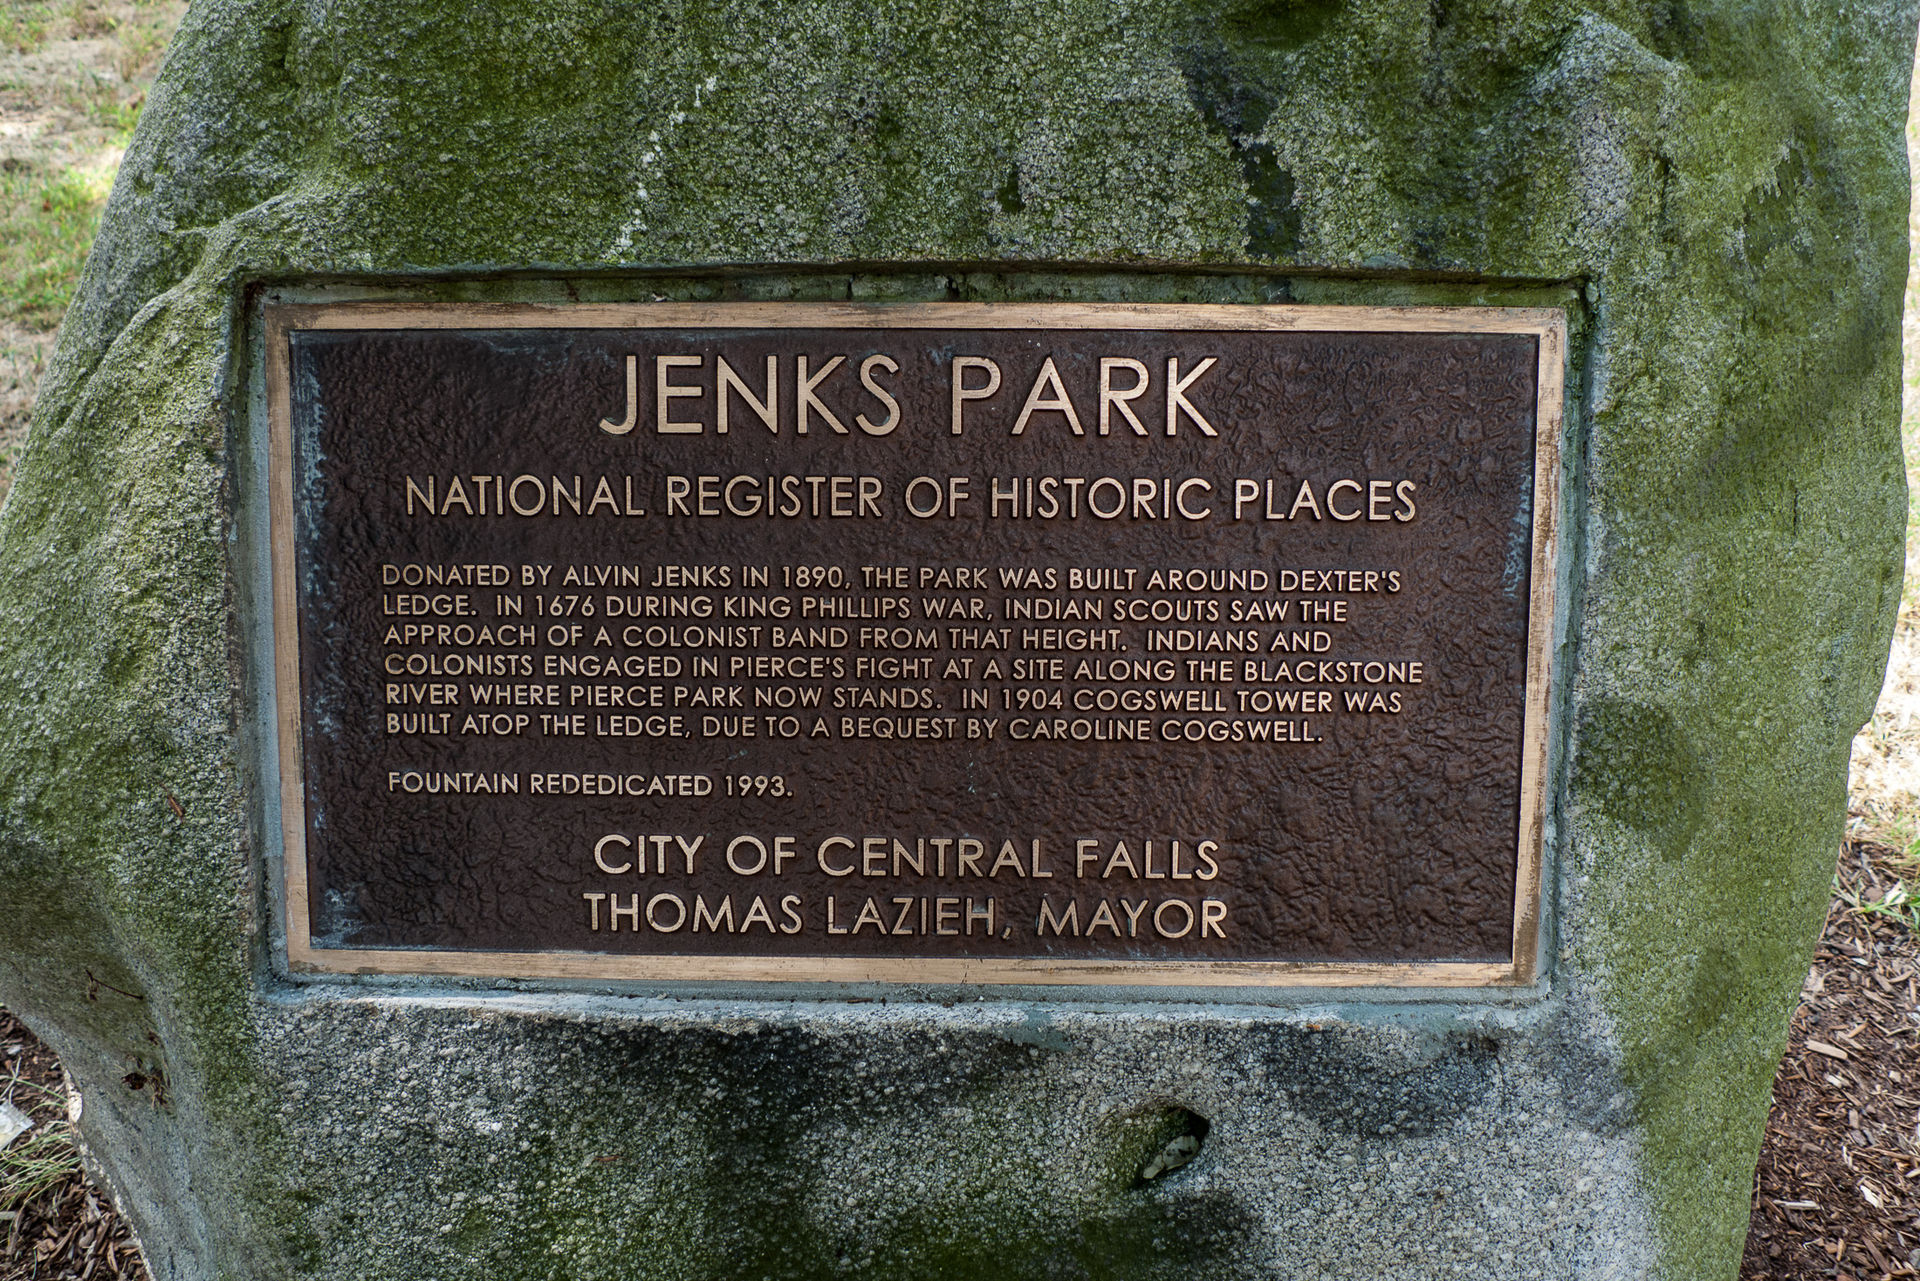 The National Register of Historic Places plaque commemorates the park's historical importance